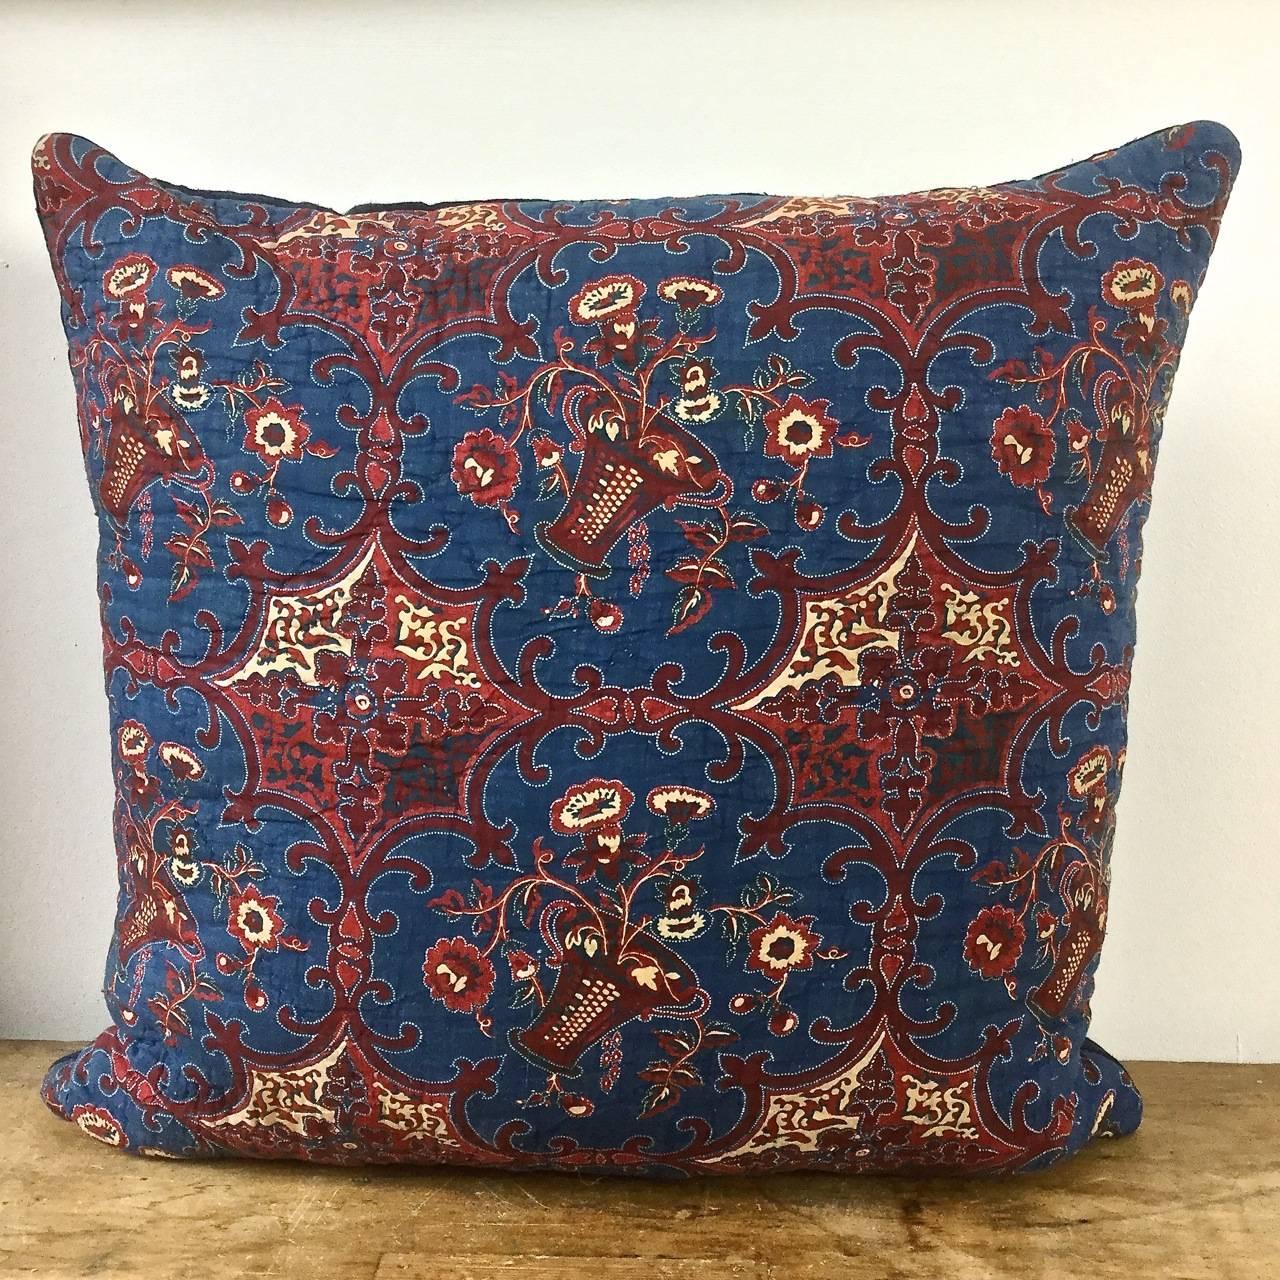 French early 19th century block-printed cotton and quilted cushion. Stylized baskets of flowers in an interesting color combination of petrol blue and a reddy brown. Backed in a natural indigo hand-dyed 19th century French linen. Slip-stitched